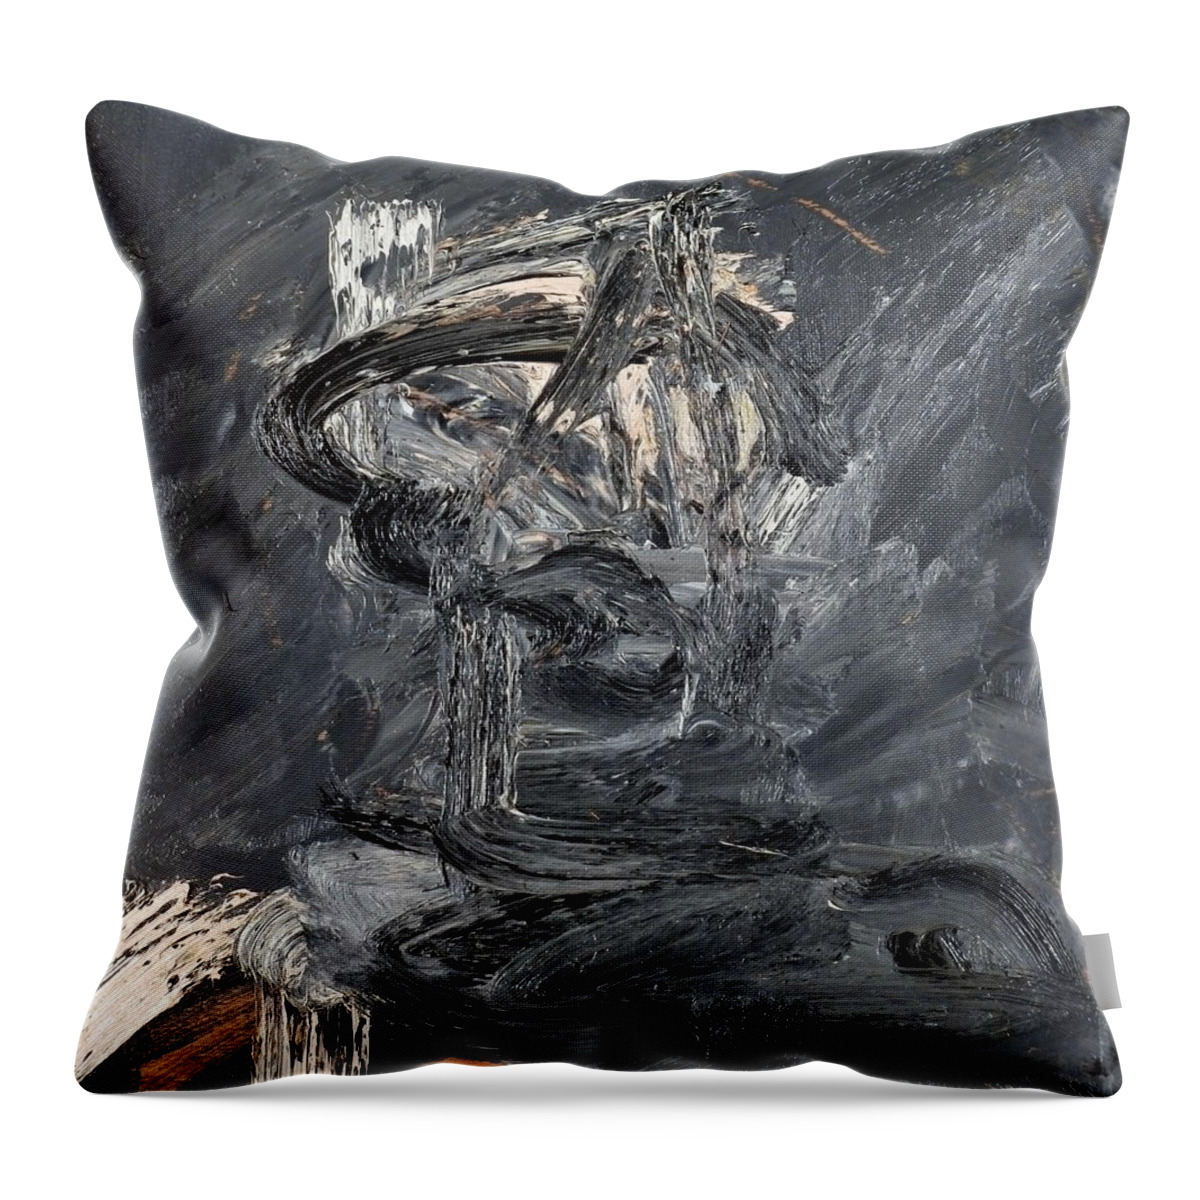 Landscape Throw Pillow featuring the painting Black And White Portrait 3 by JC Armbruster